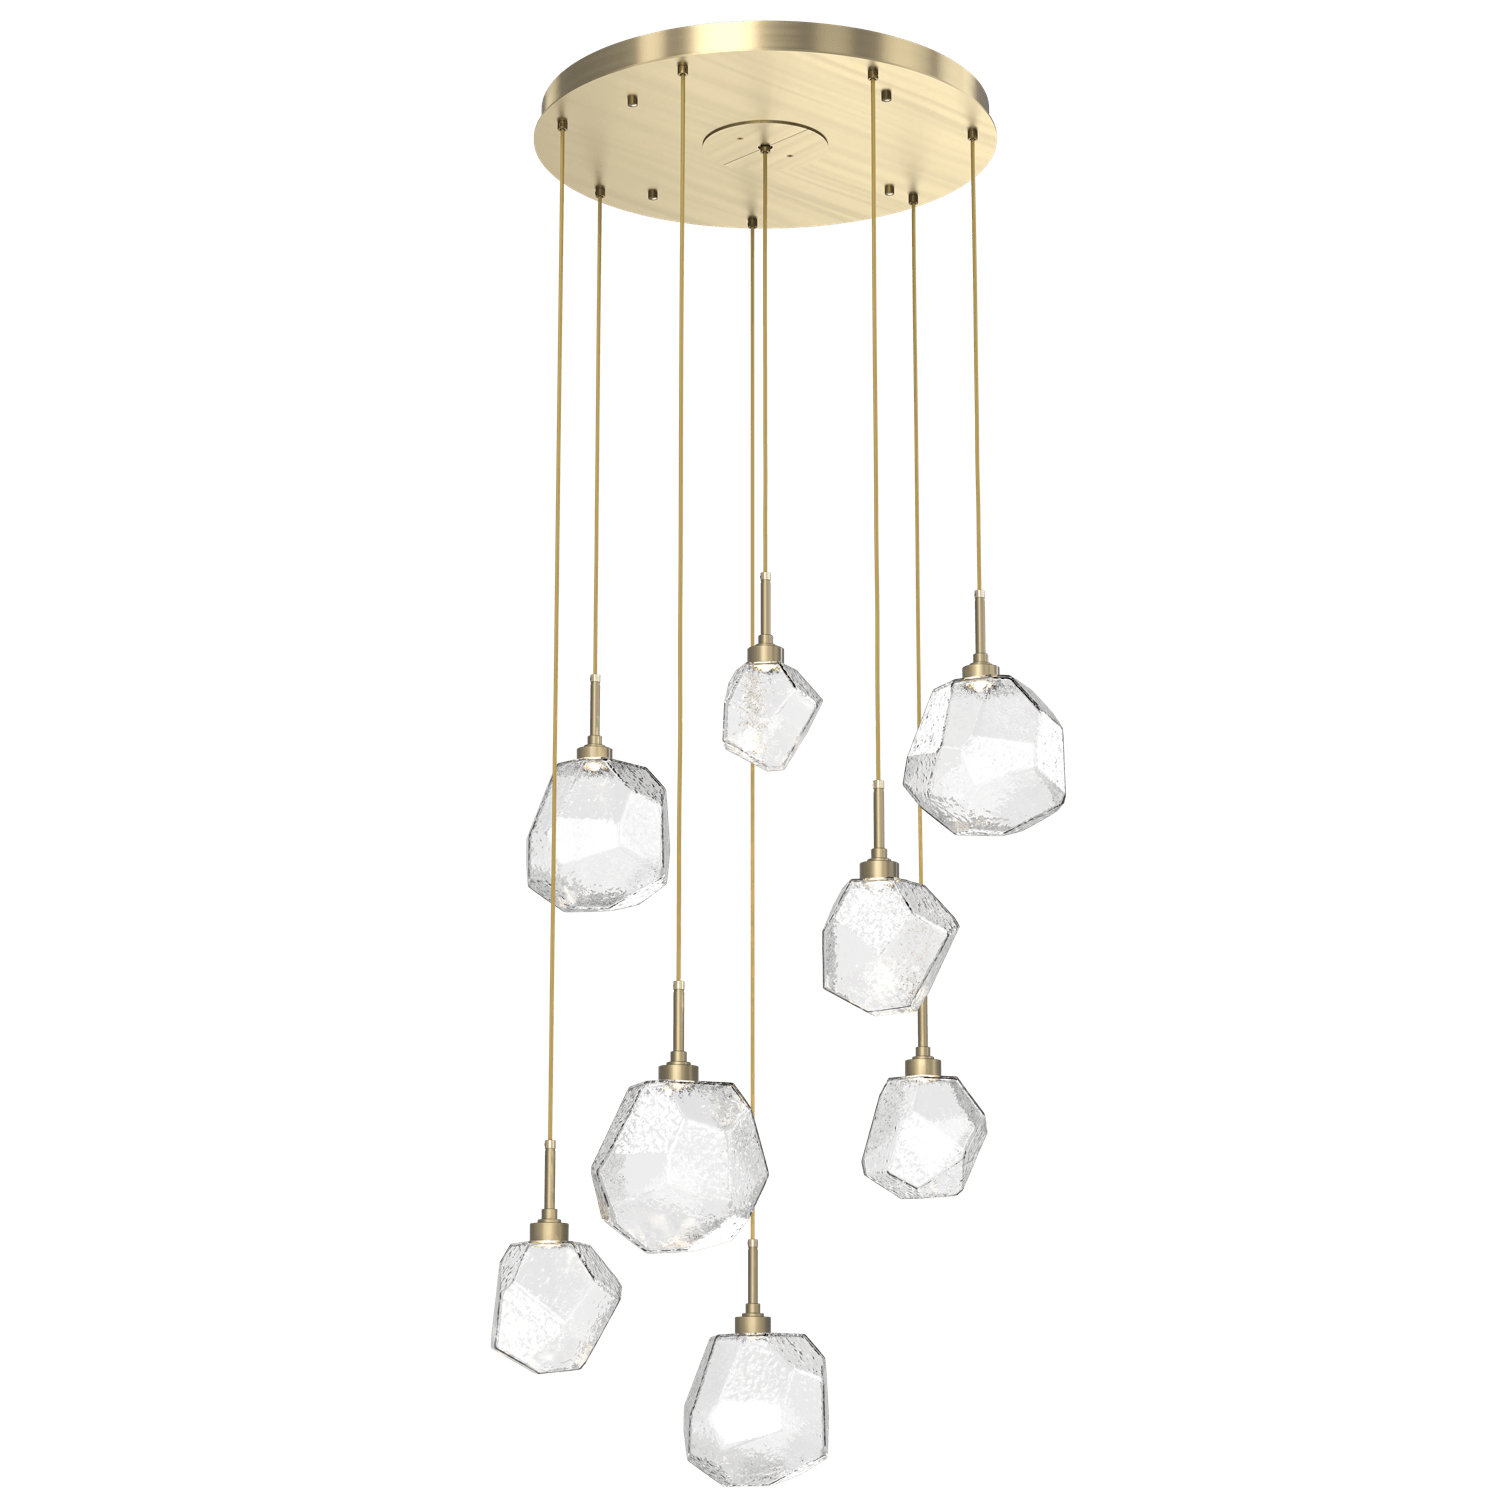 CHB0039-08-HB-C-Hammerton-Studio-Gem-8-light-round-pendant-chandelier-with-heritage-brass-finish-and-clear-blown-glass-shades-and-LED-lamping